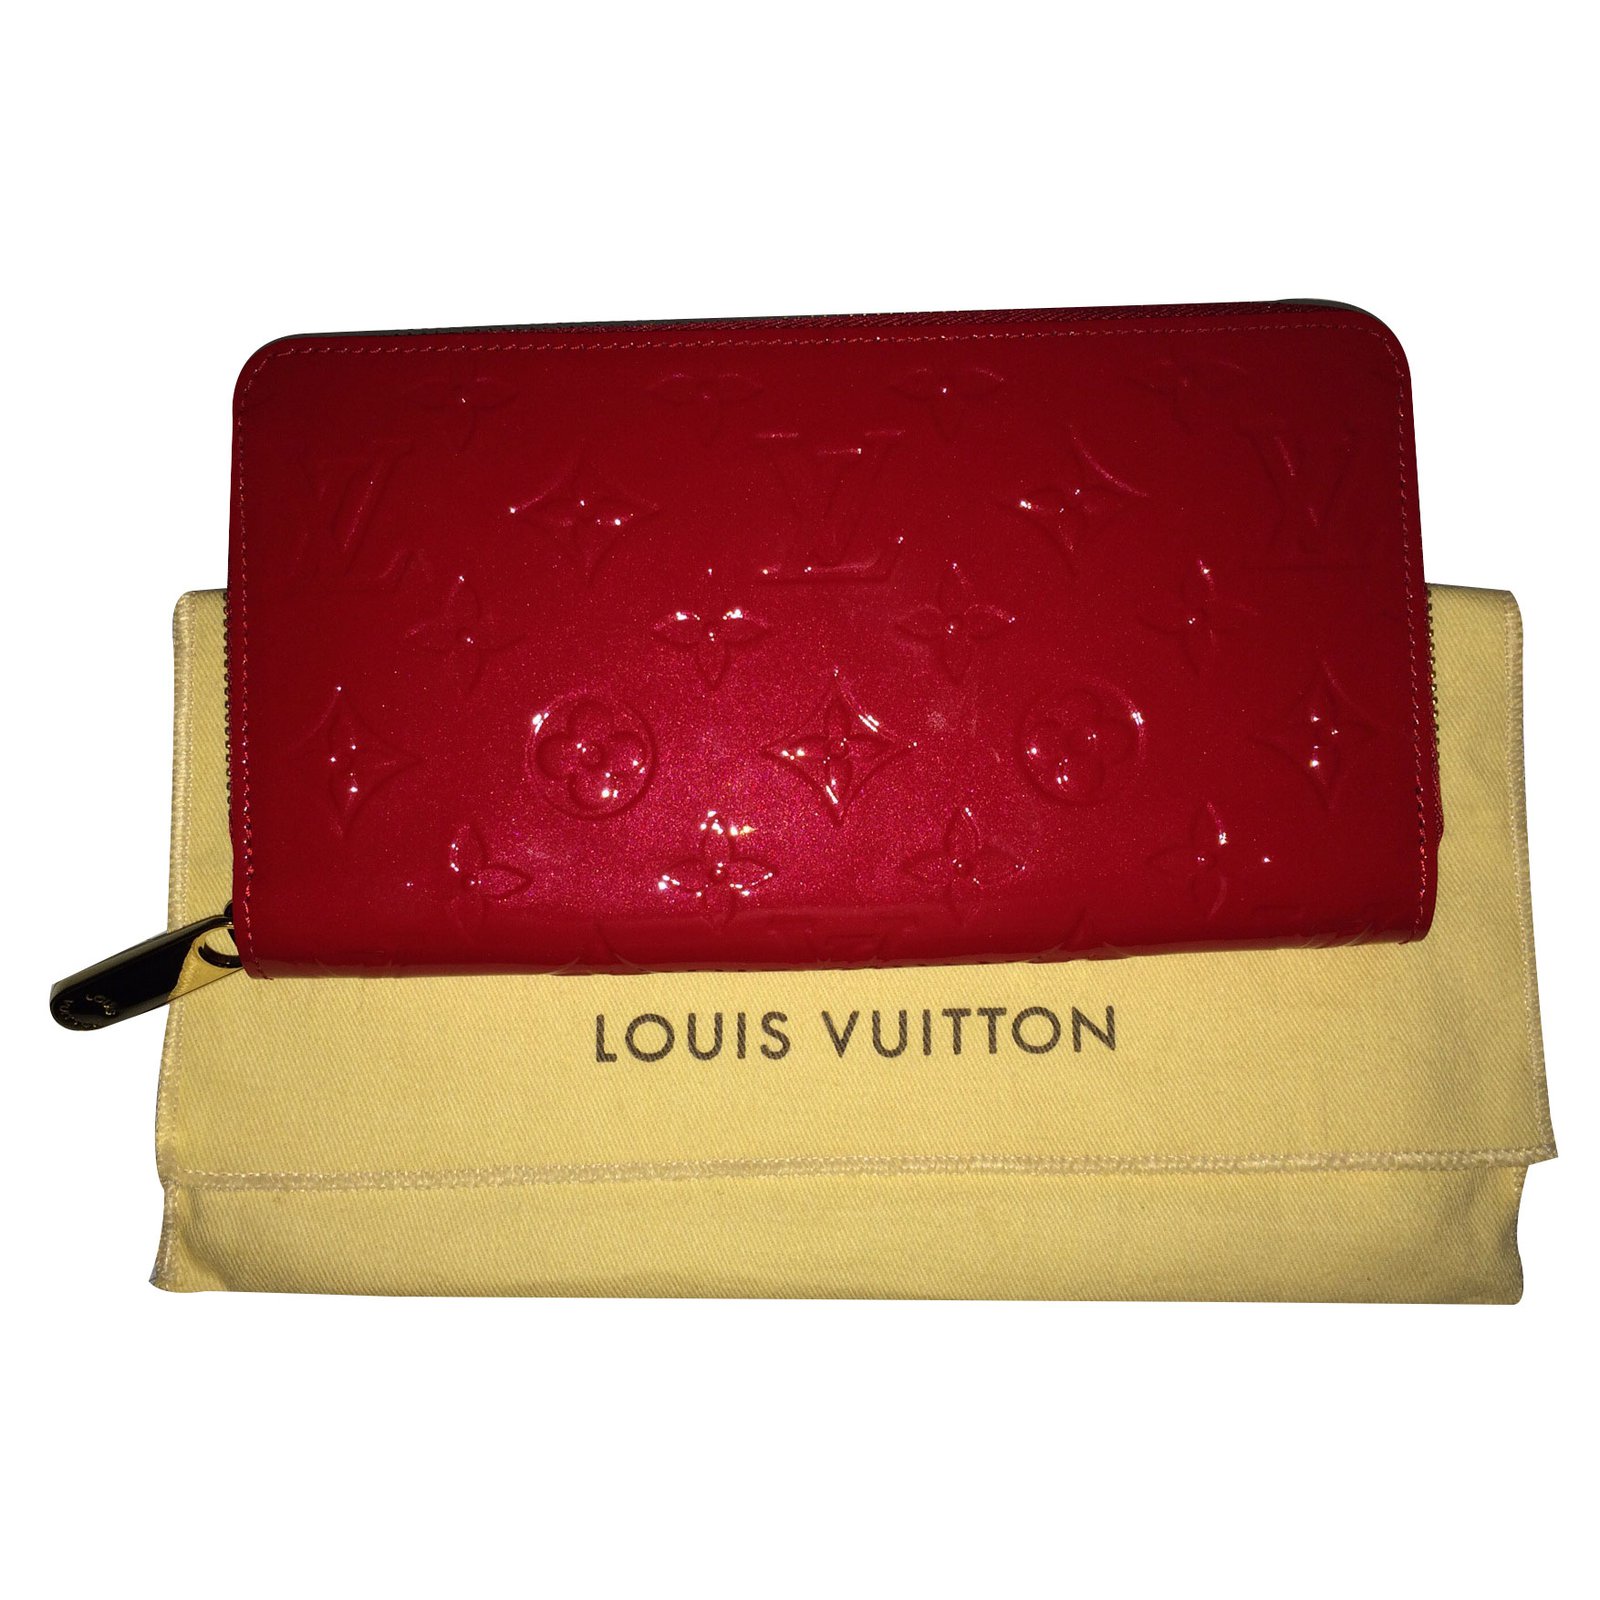 patent leather wallets